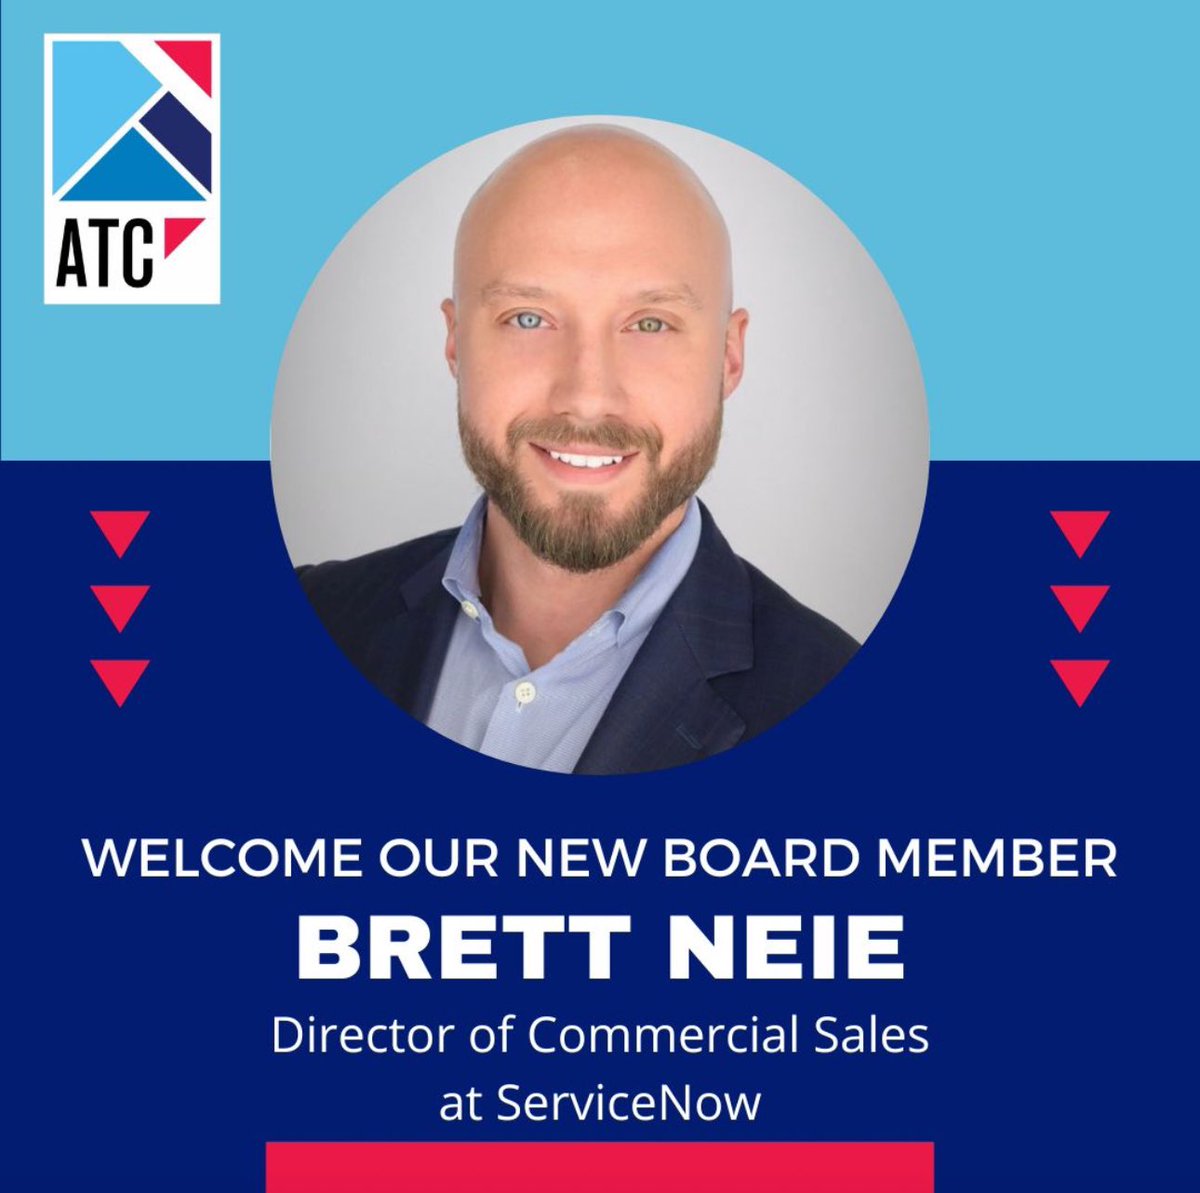 ATC is thrilled to announce that Brett Neie from ServiceNow has joined our Board.

ATC seeks small, medium, and large tech companies to support our efforts and lend their voice to the conversations about Austin’s next phases.  

#austintech #austin